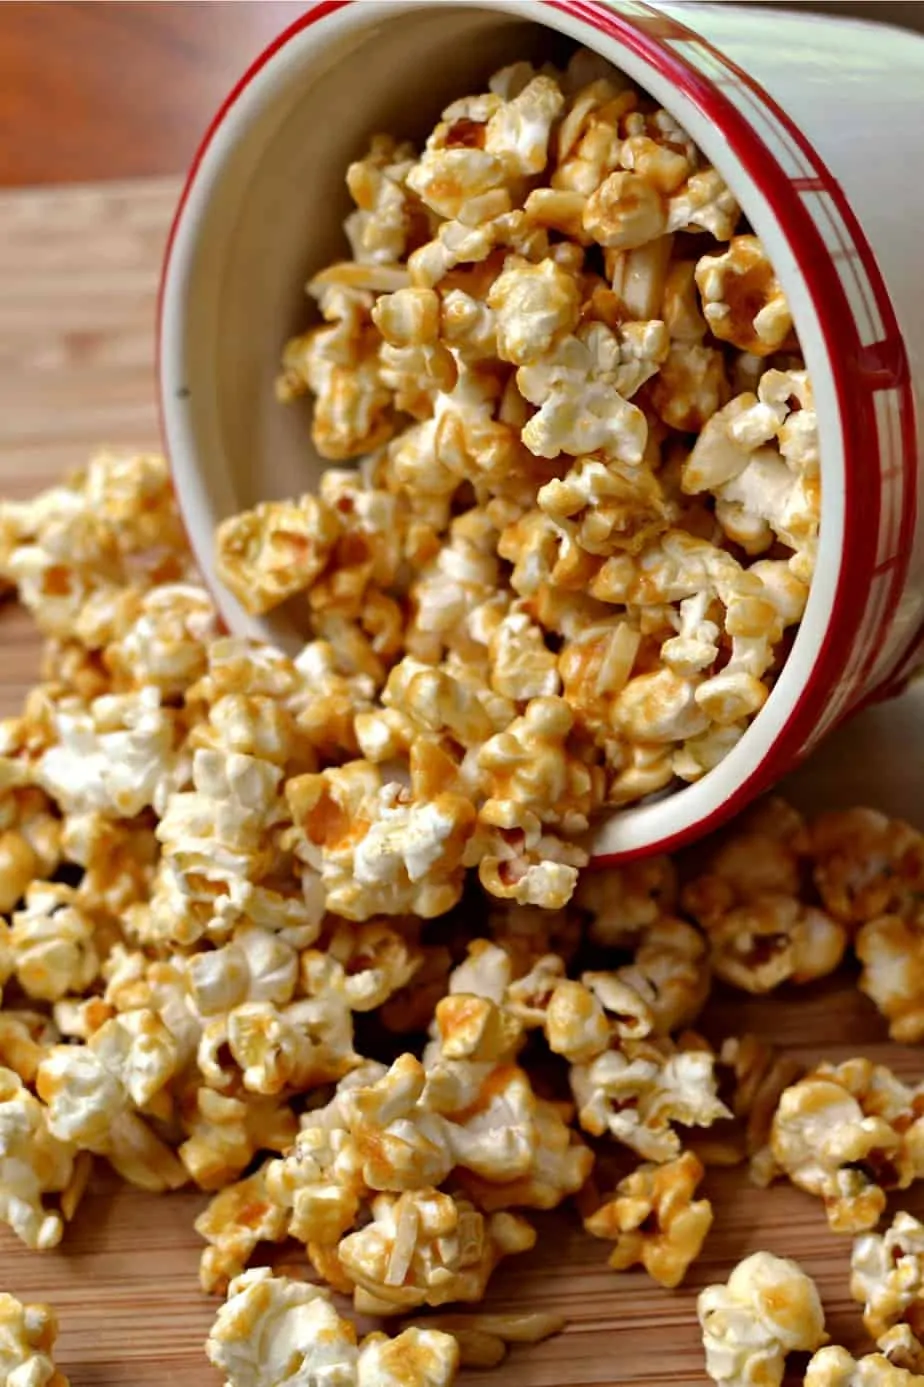 This easy Caramel Popcorn combines freshly microwaved popcorn with homemade caramel and almond slivers.